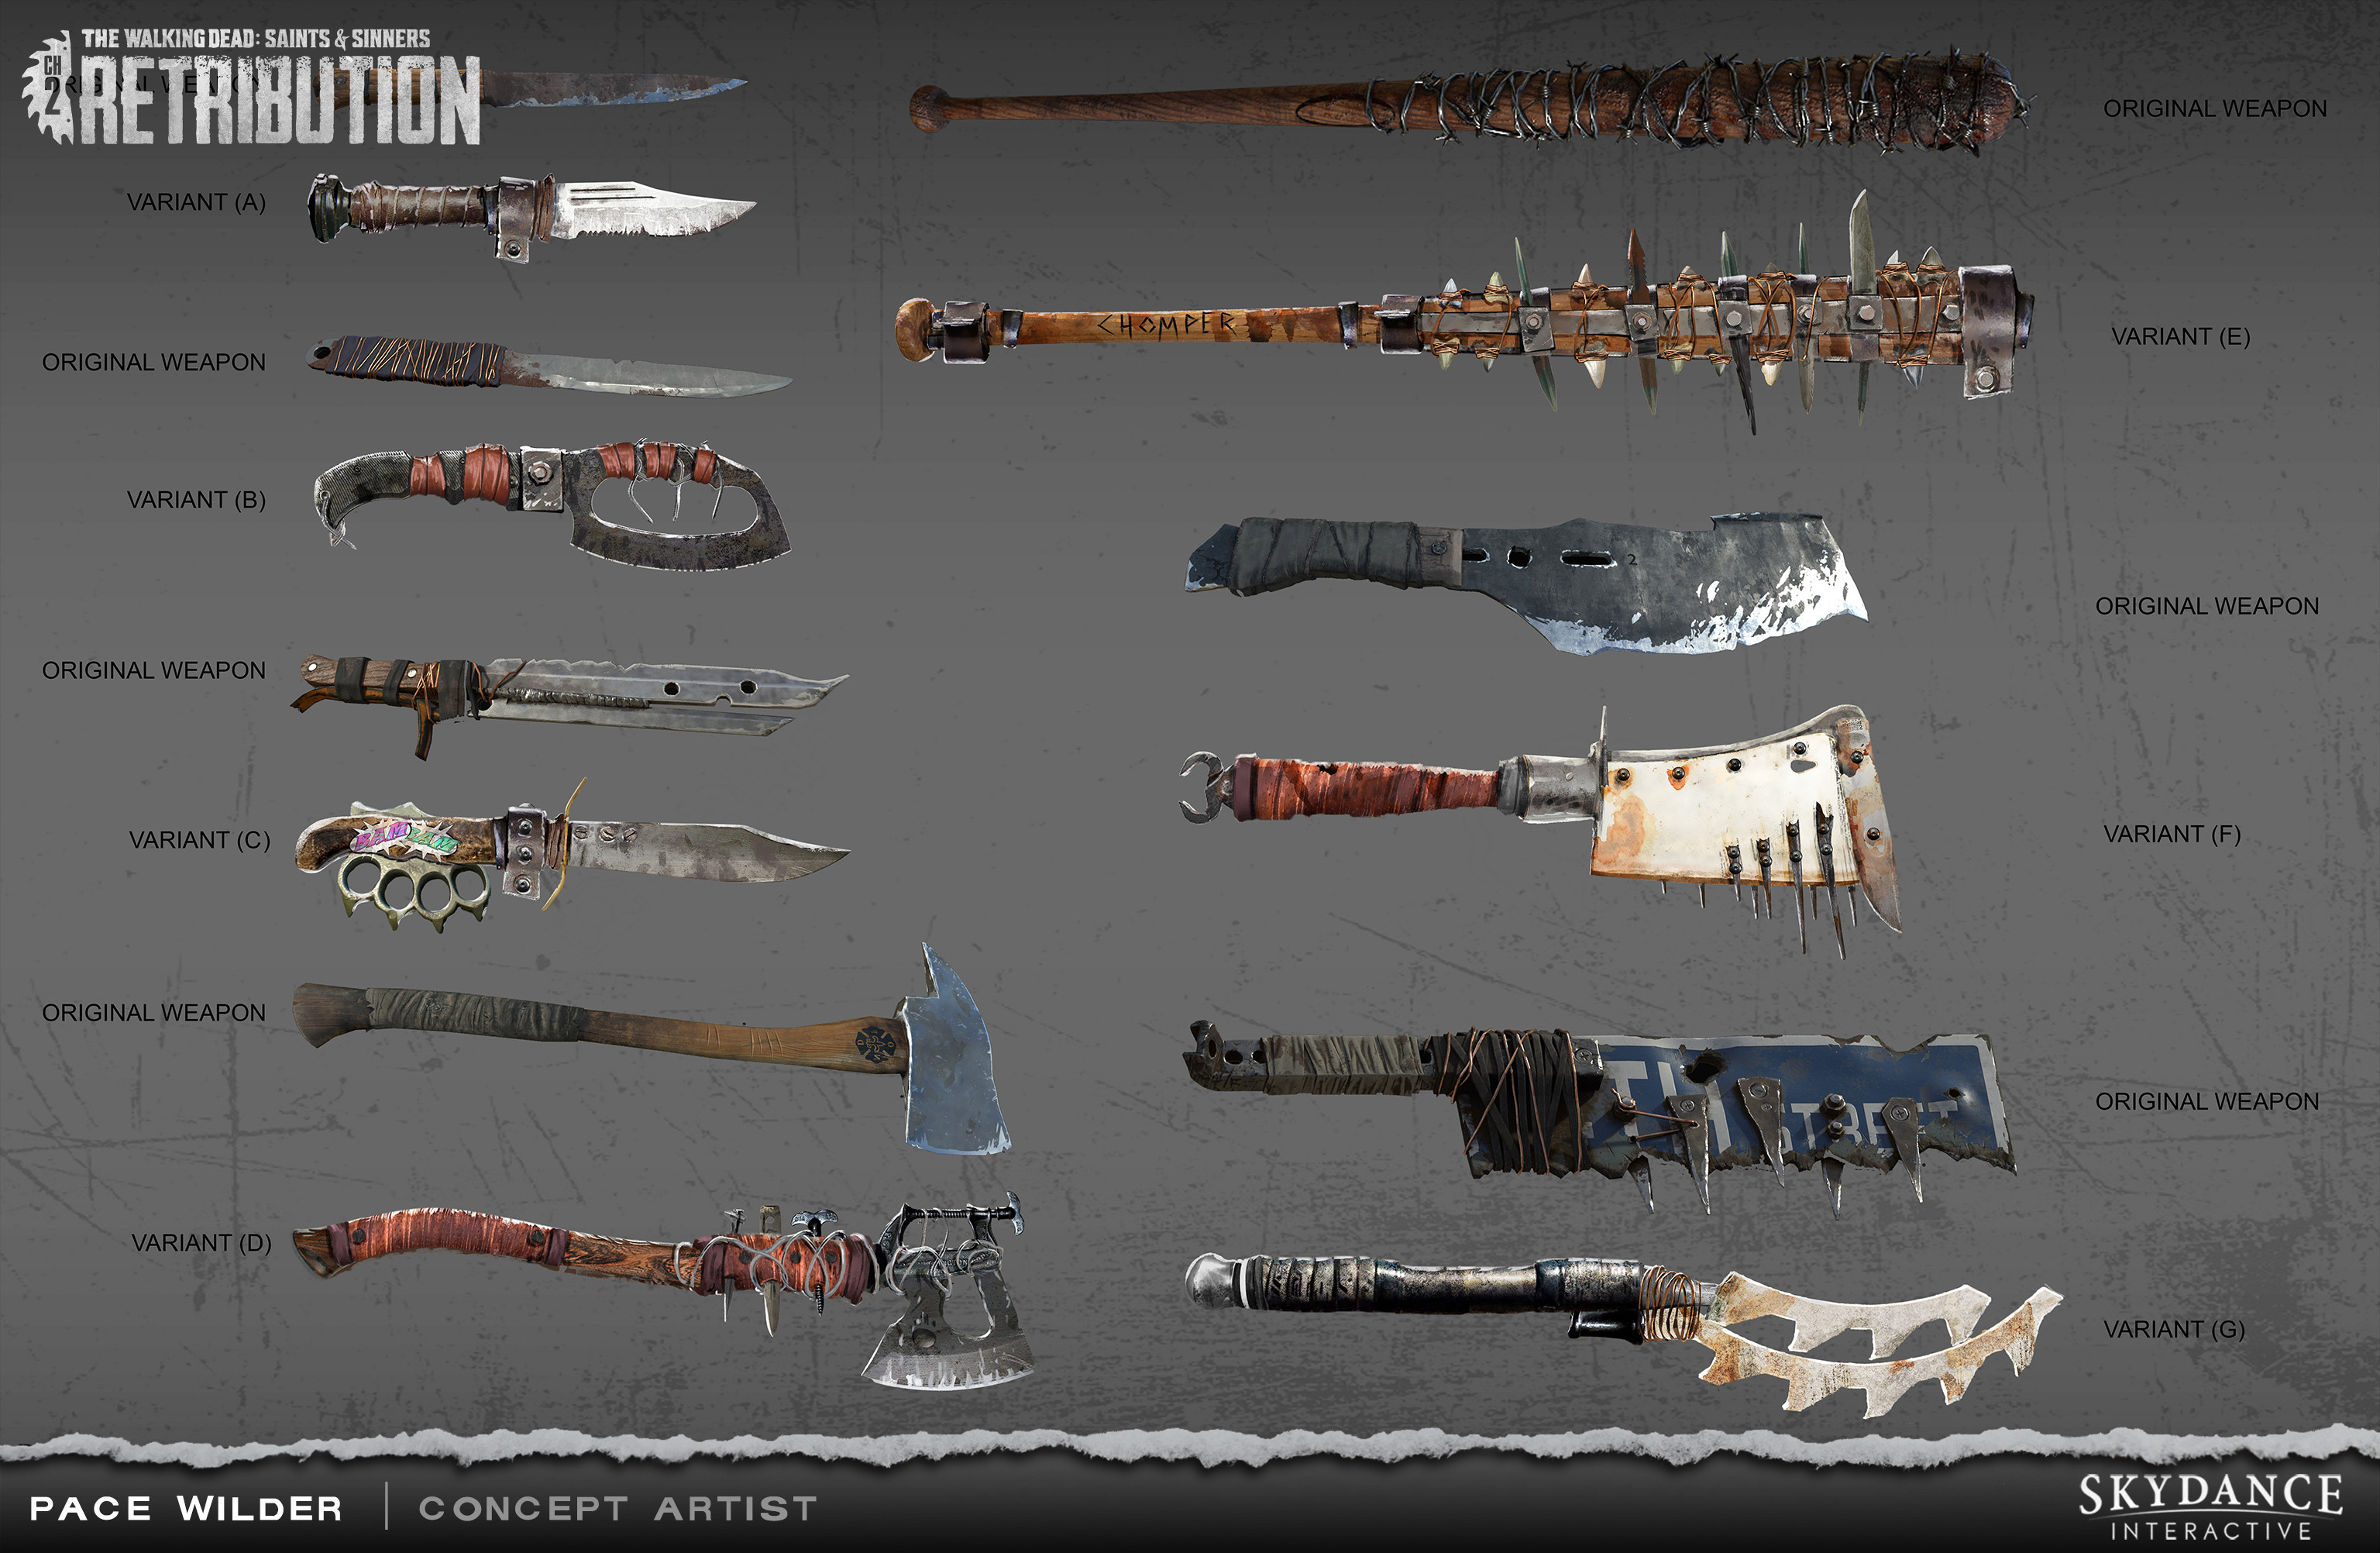 I was tasked to design the "Upgrade" for a series of melee weapons from Chapter 1. The "Original Weapon" is what I was given, the "Variant" is what I designed. Each one had to fit similar specifications in terms of animation, size, and functionality.